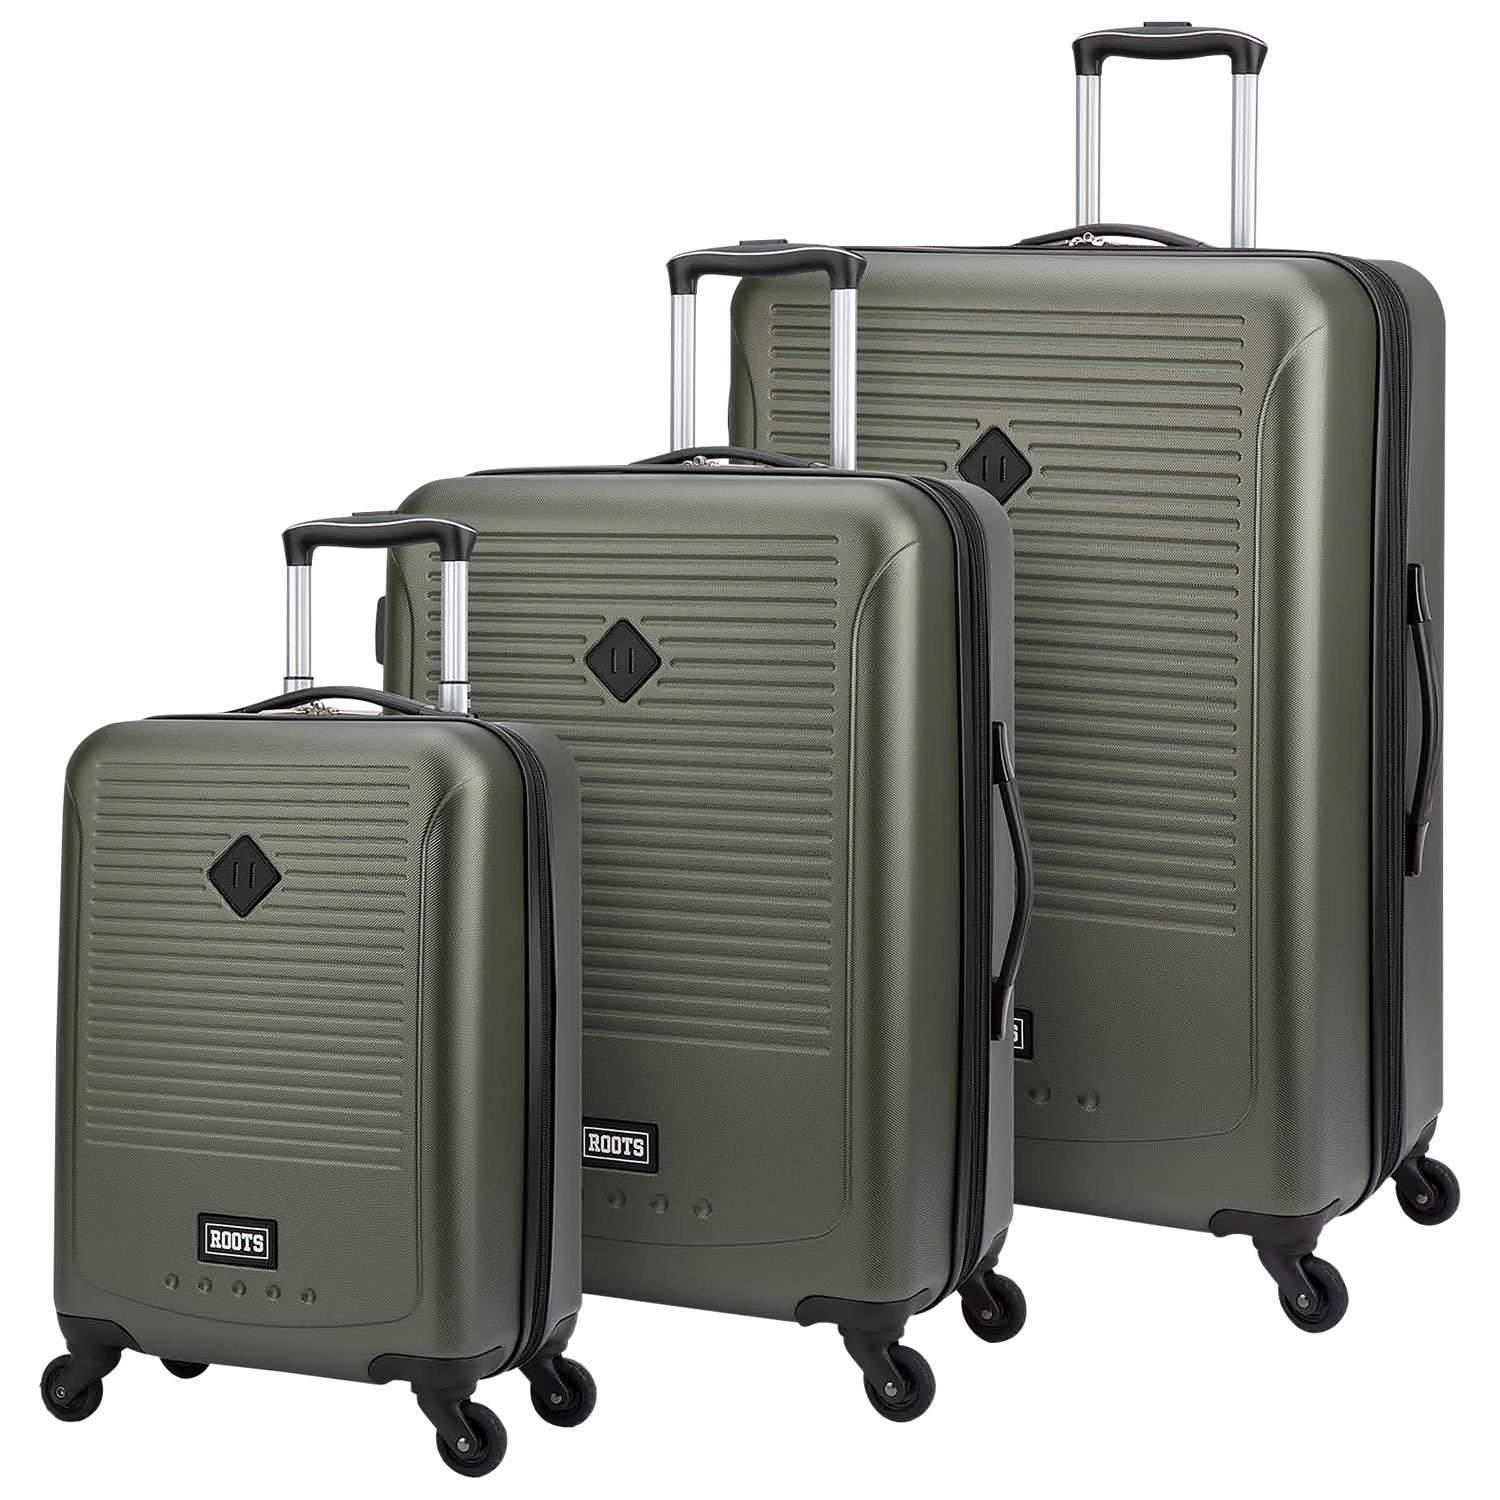 Roots Baffin 3-Piece Hard Side Expandable Luggage Set - Olive - Only at Best Buy